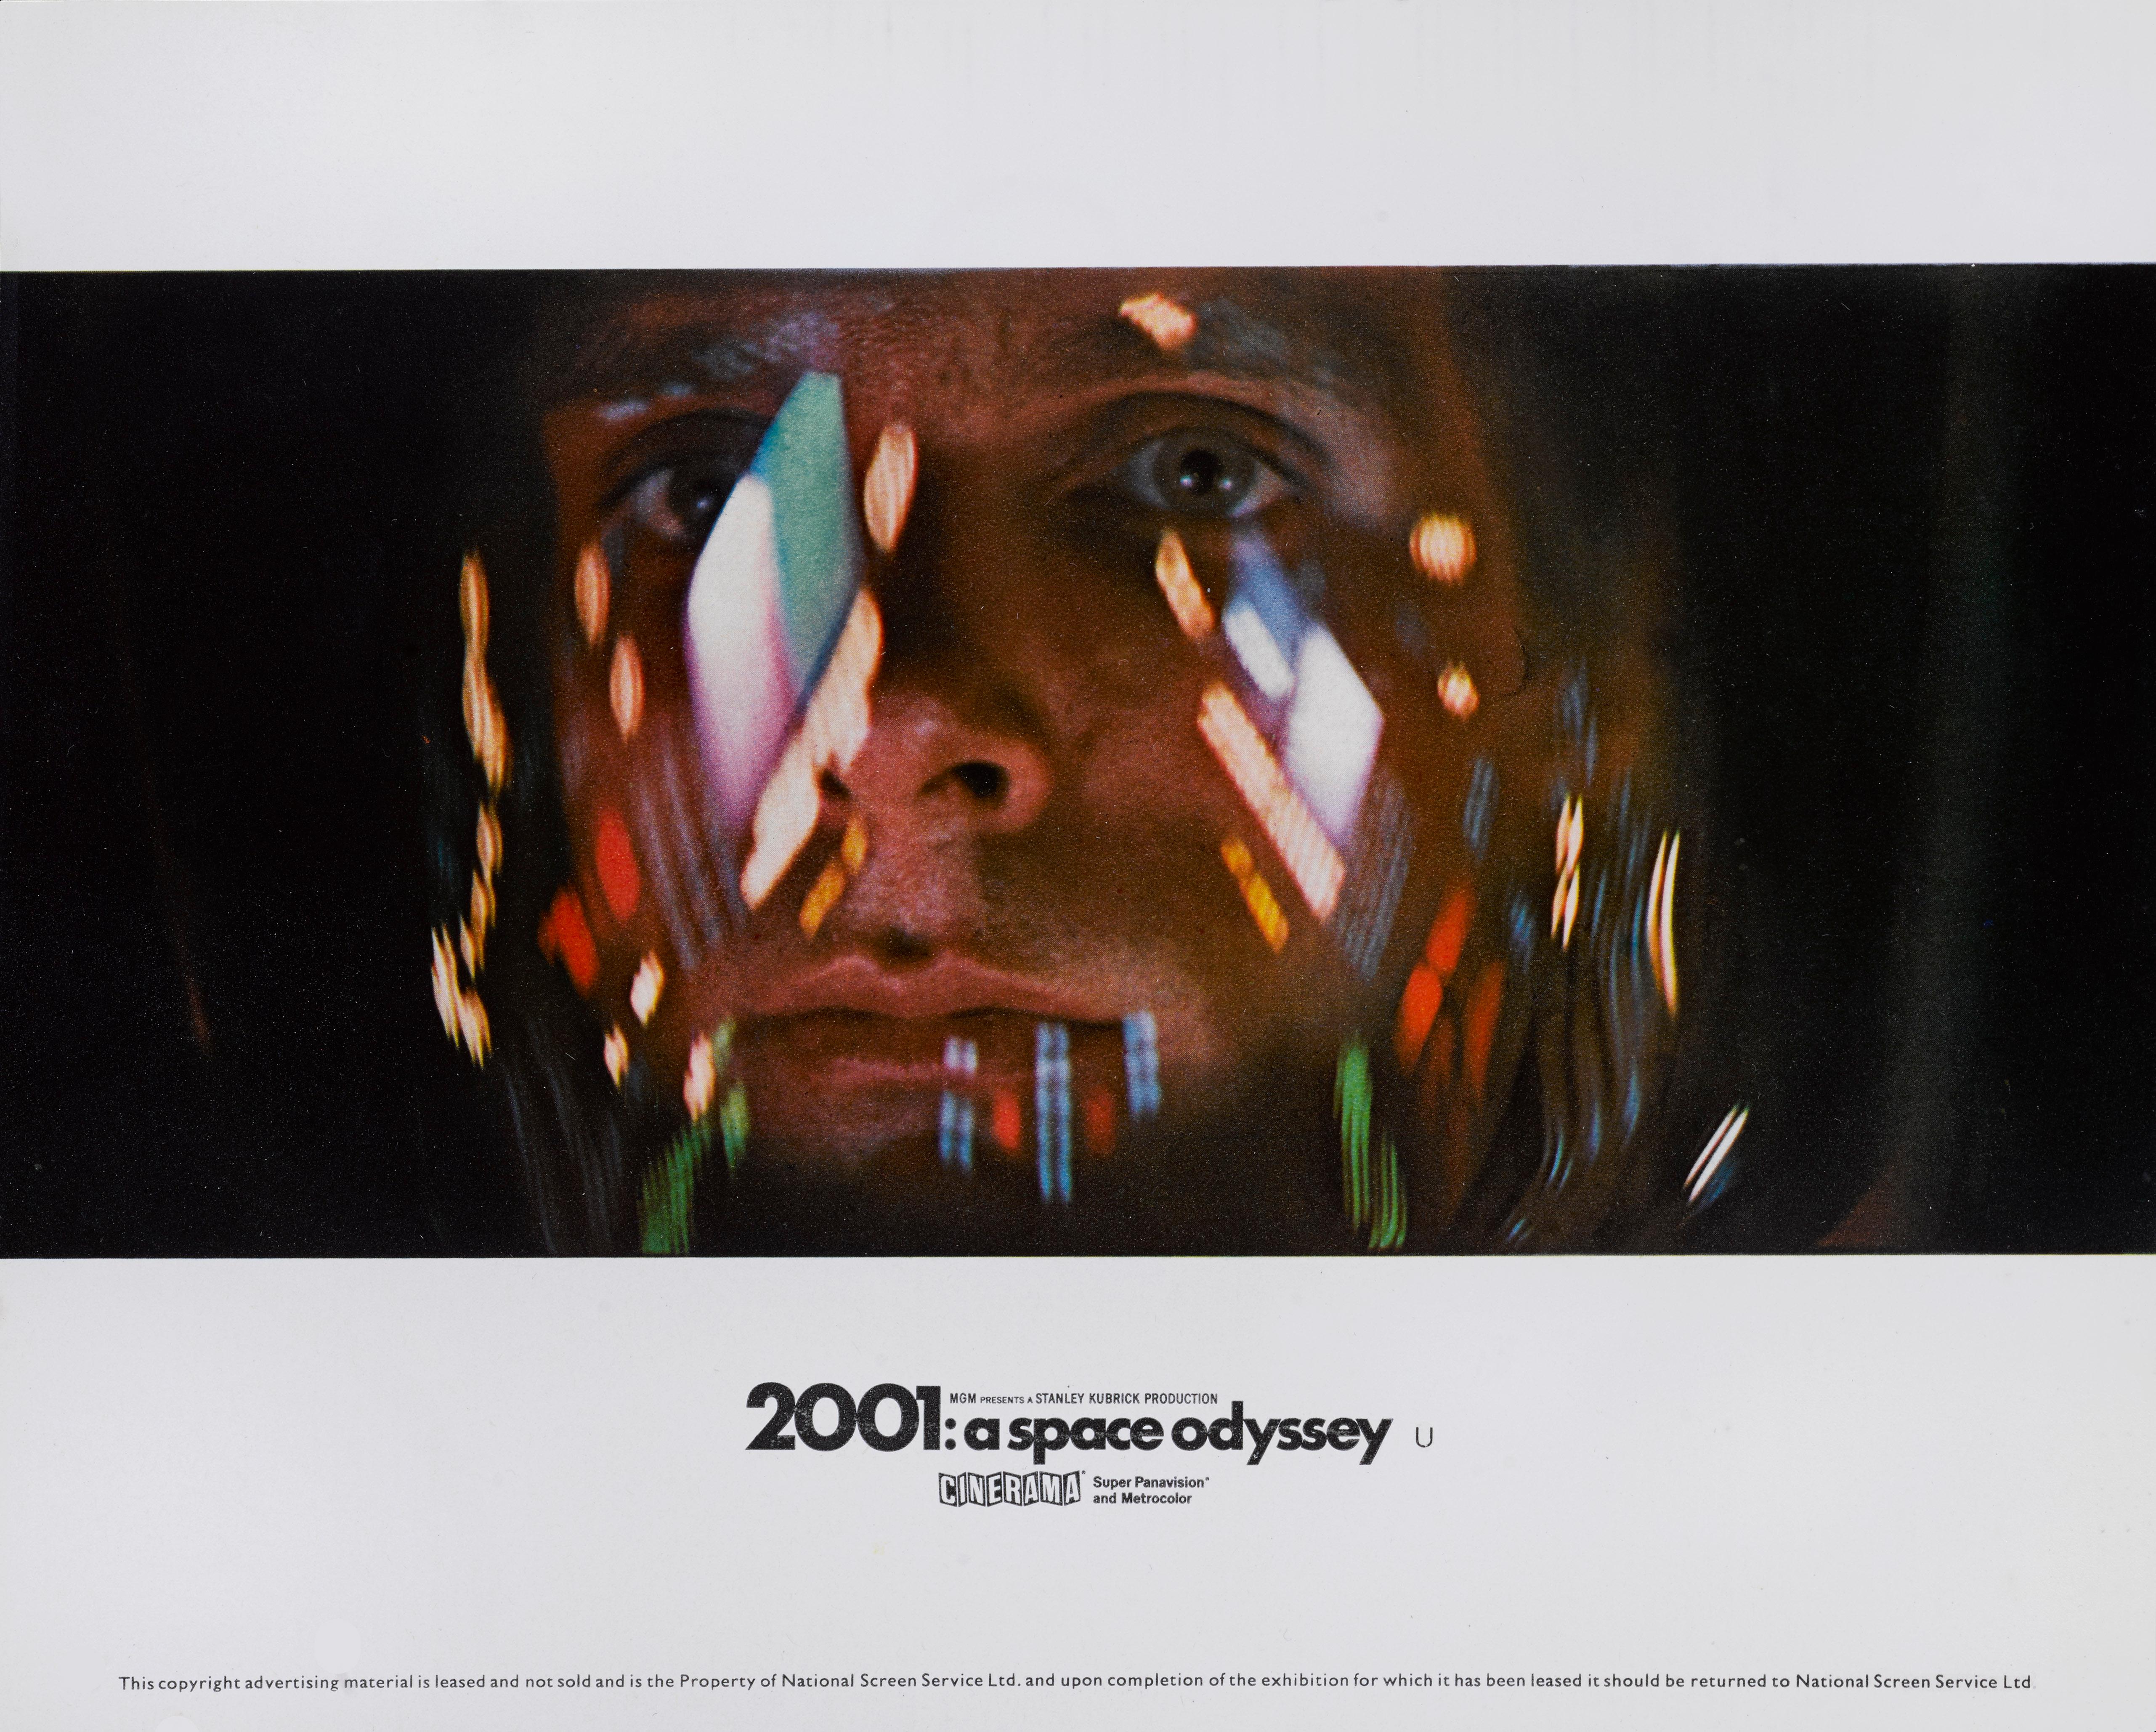 Original color production still for the Cinerama release of Stanley Kubrick's 2001: A Space Odyssey.
The Cinerama release stills are much harder to find and more desirable.
This piece would be packed in strong card and sent out flat.
 